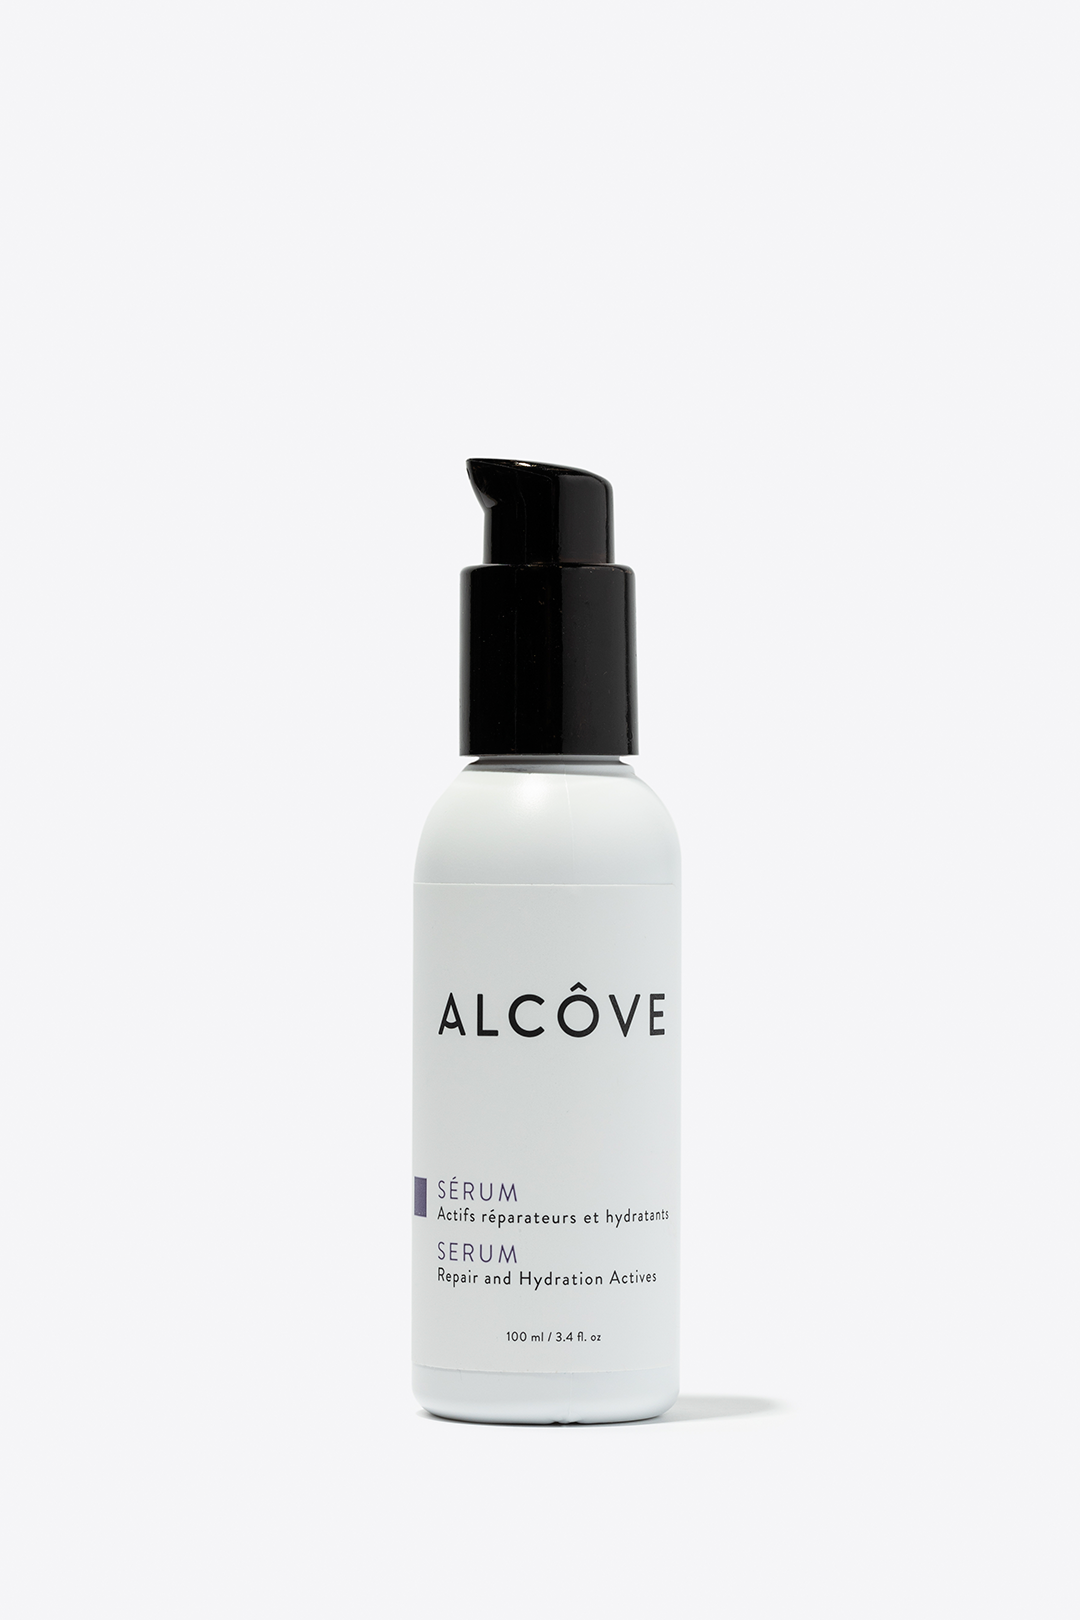 Alcove - SERUM - by Alcove |ProCare Outlet|